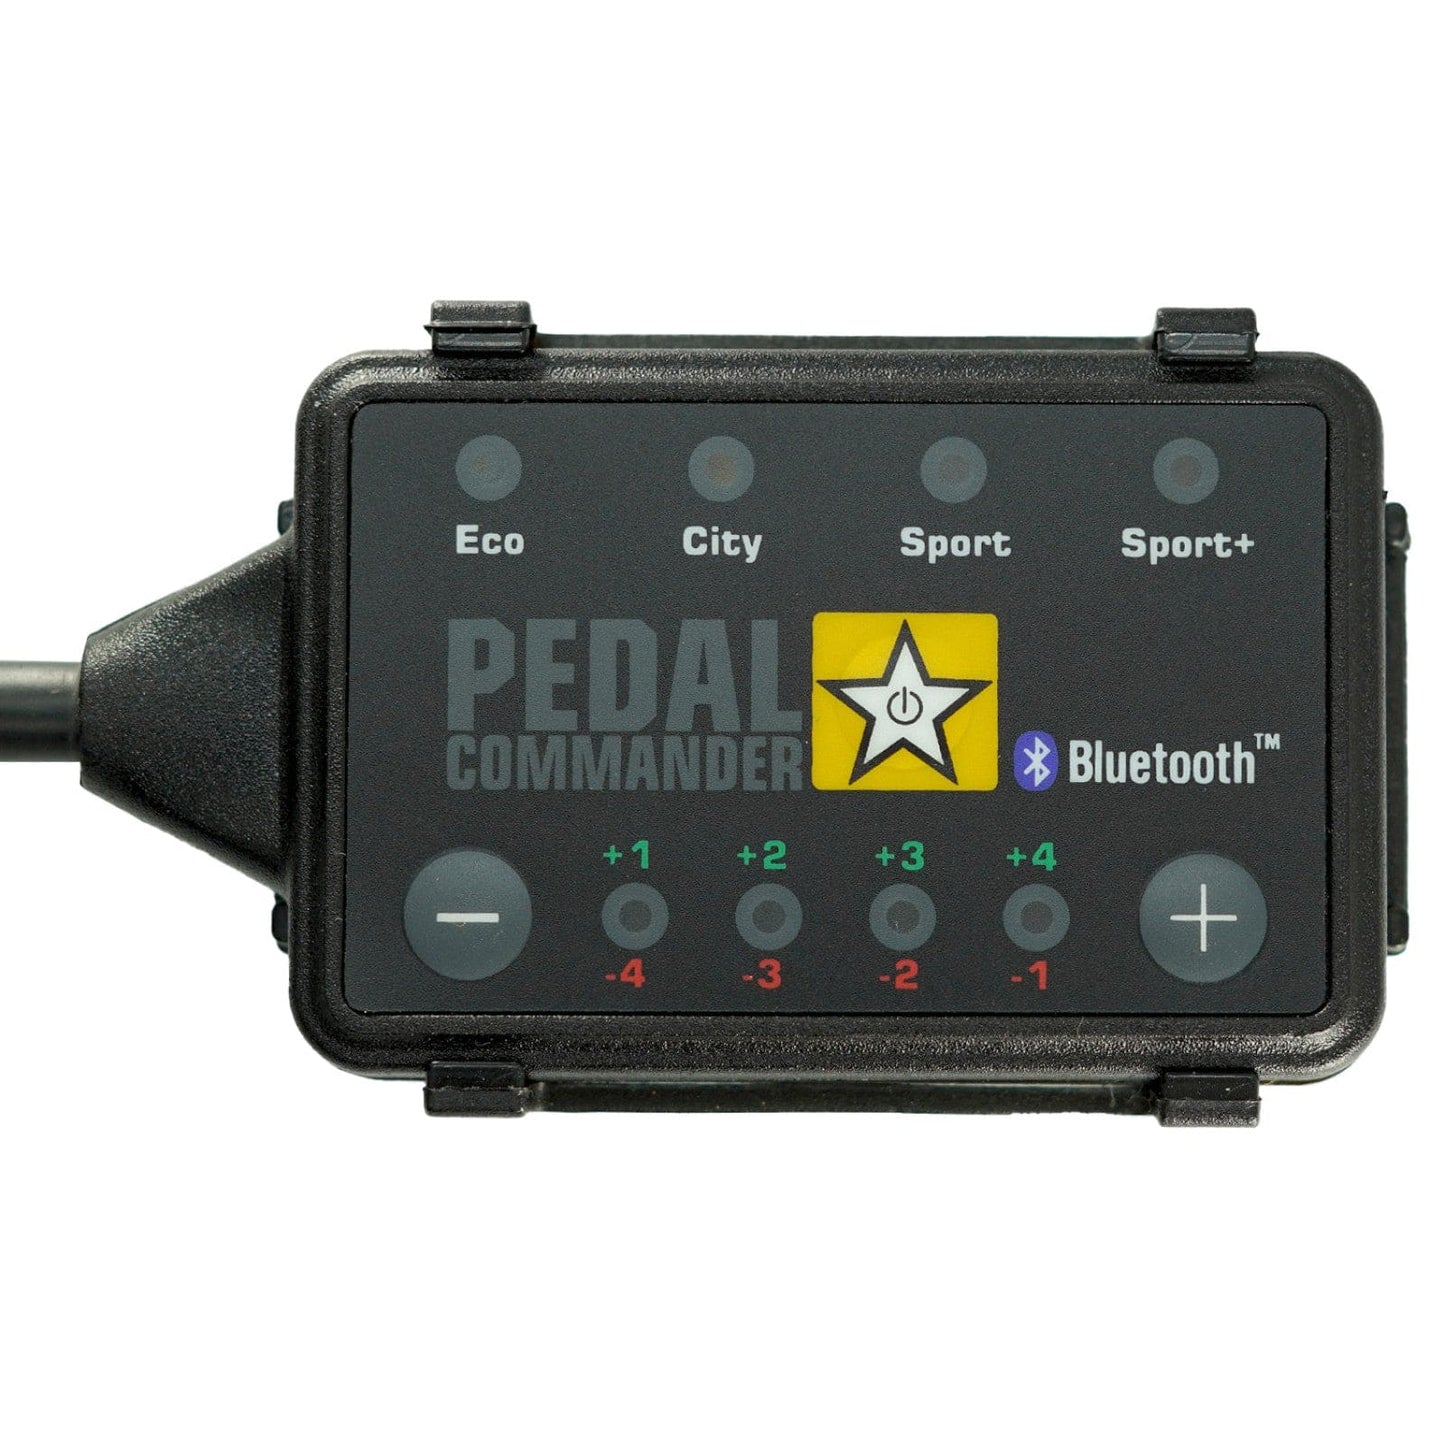 Pedal Commander 51-NSN-70Z-01 Pedal Commander Throttle Response Controller with Bluetooth Support - Rico's Garage